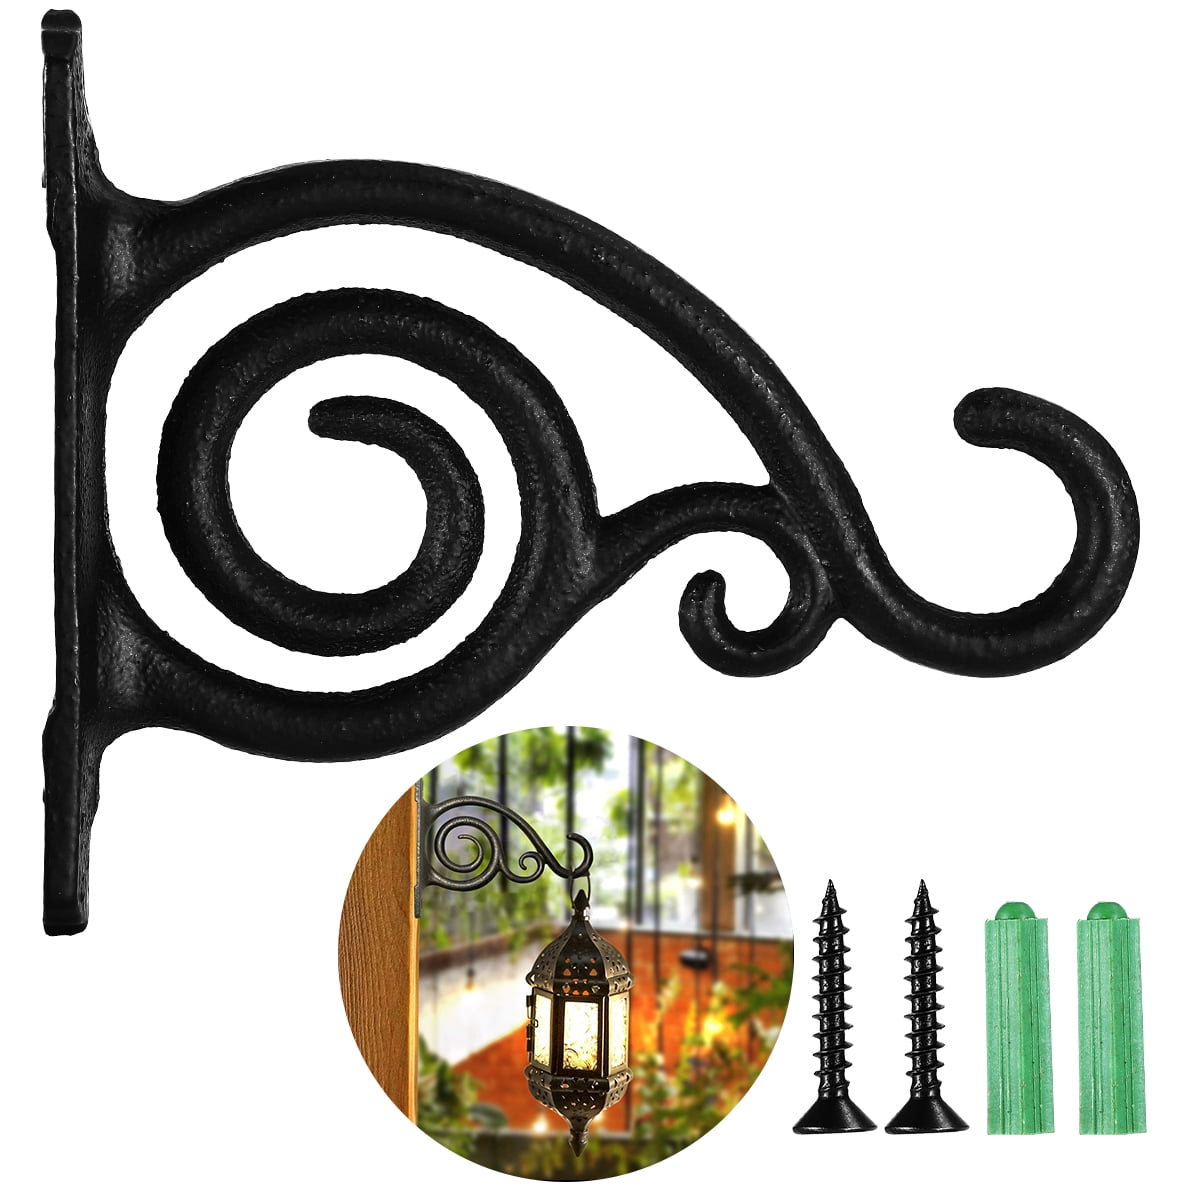 Bird feeders 2 Black Metal Plant Hooks for Wall Decoration Plant Hooks for Hanging Lanterns Flower Baskets Indoor and Outdoor 6 inches Home Decoration 